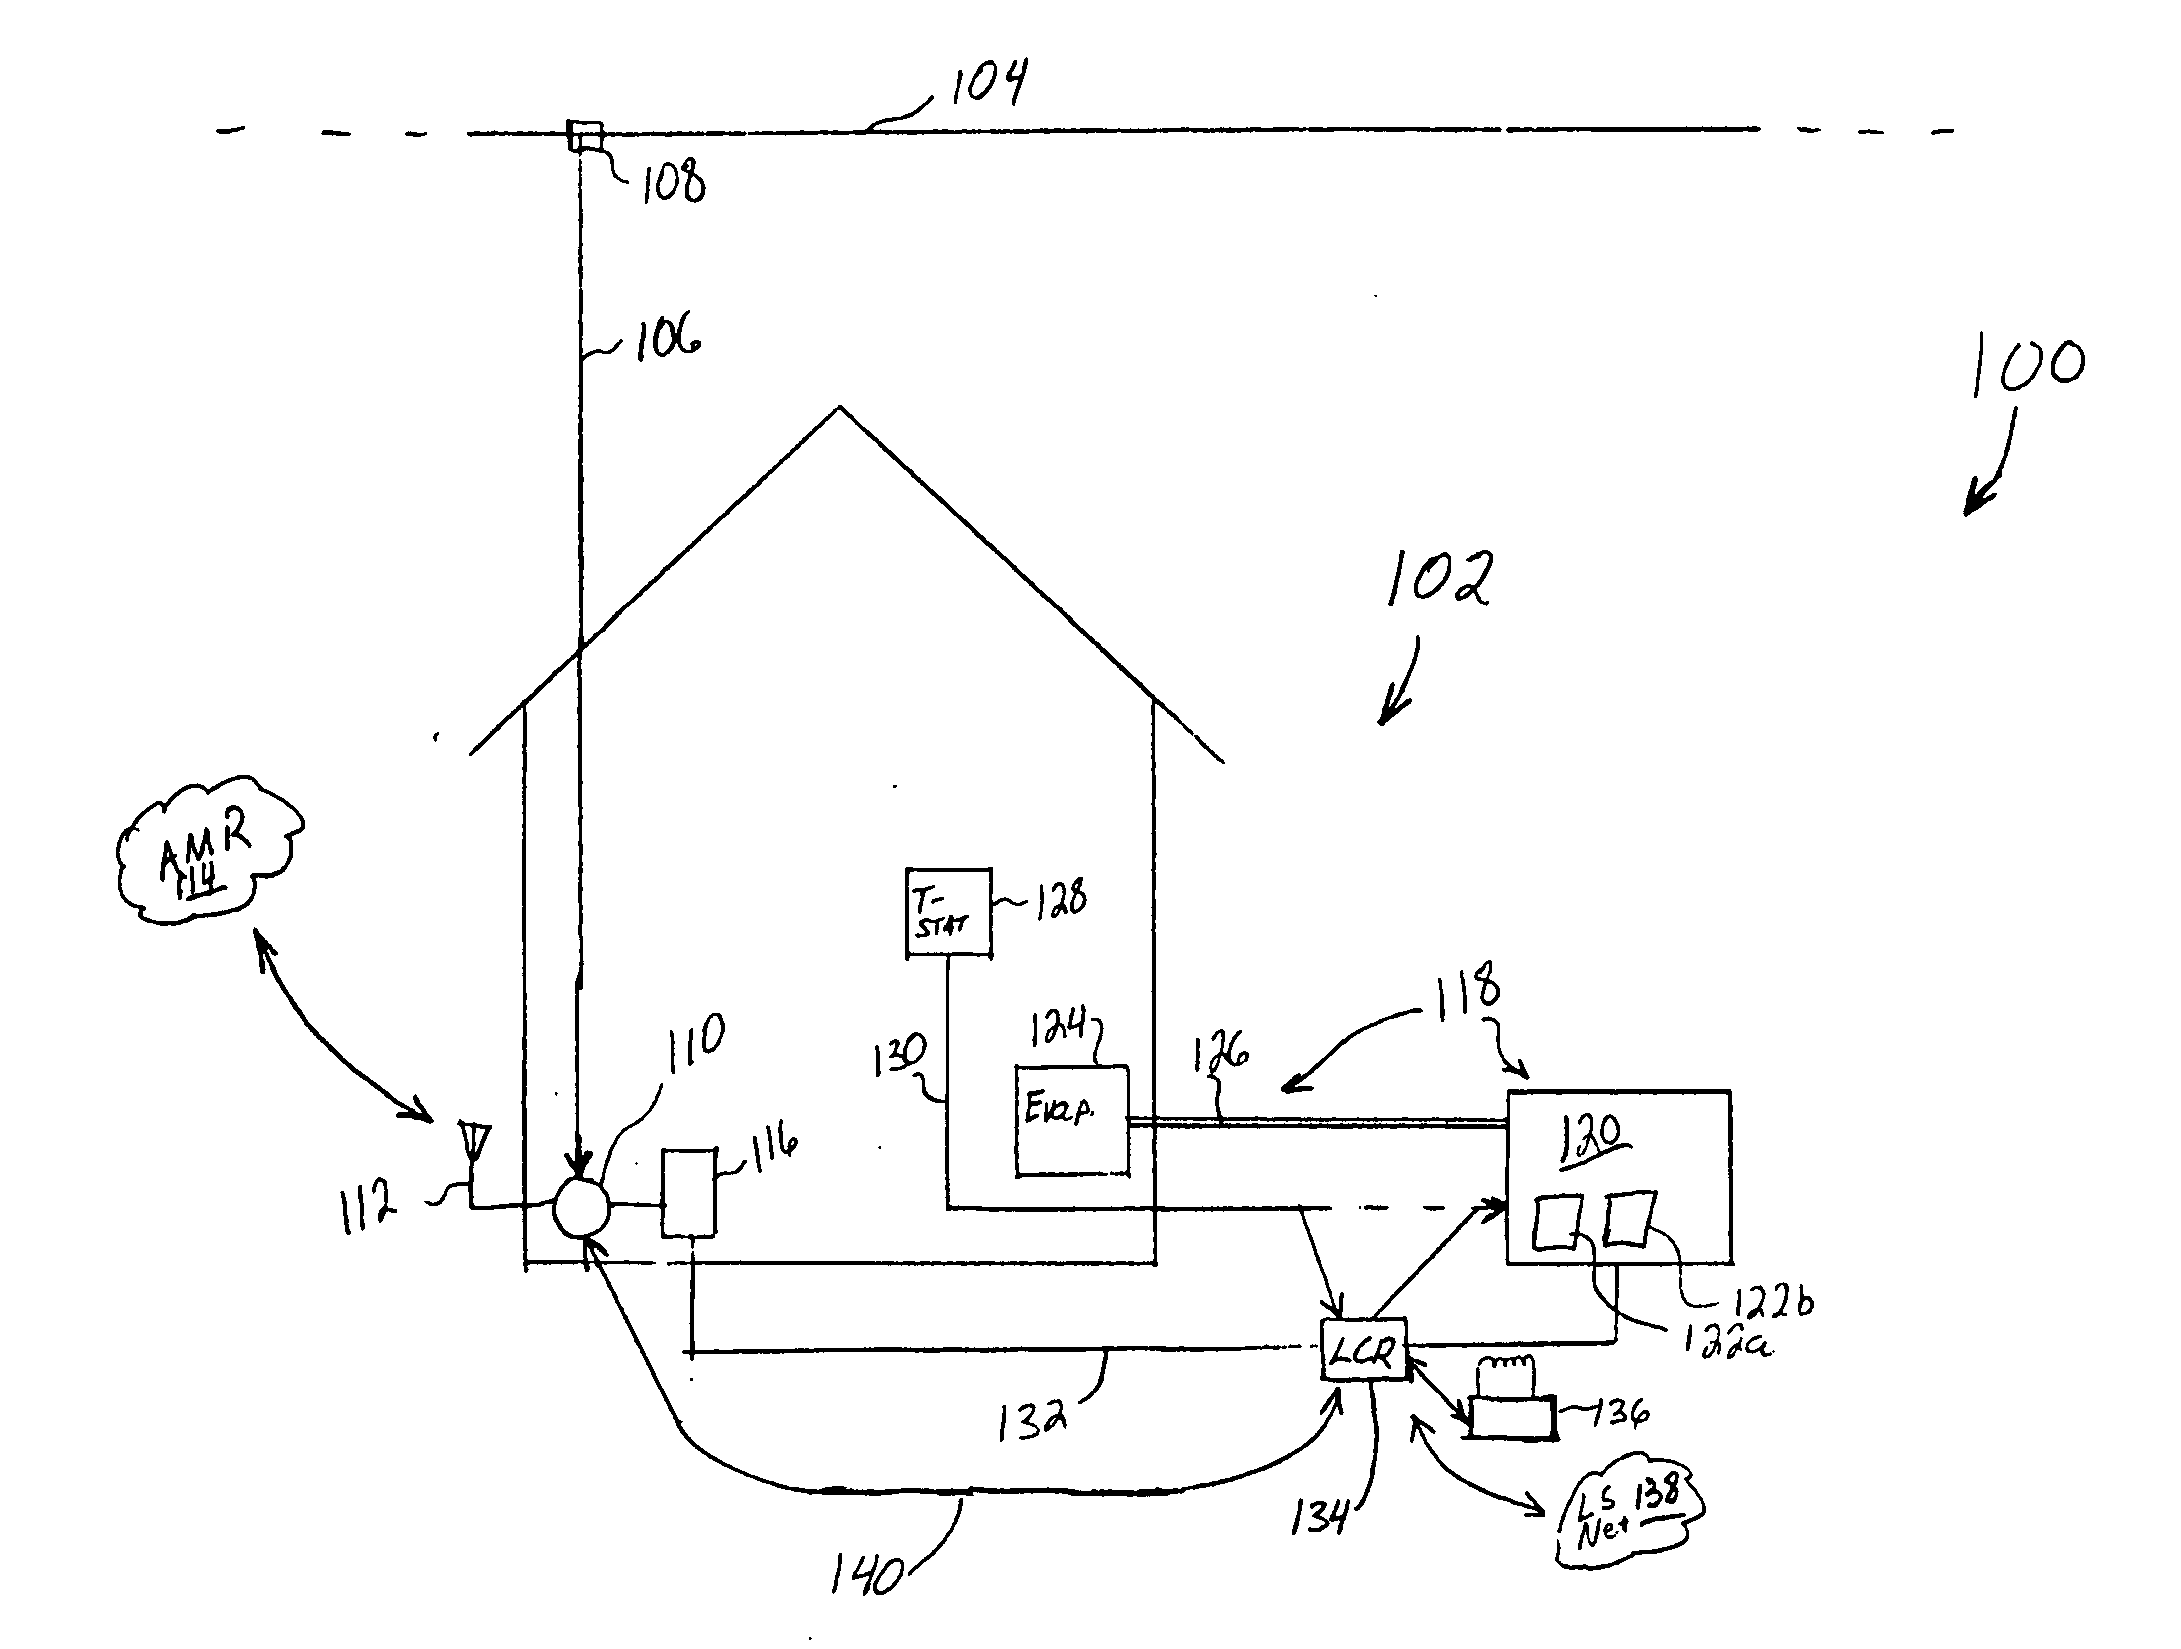 Load shedding control for cycled or variable load appliances